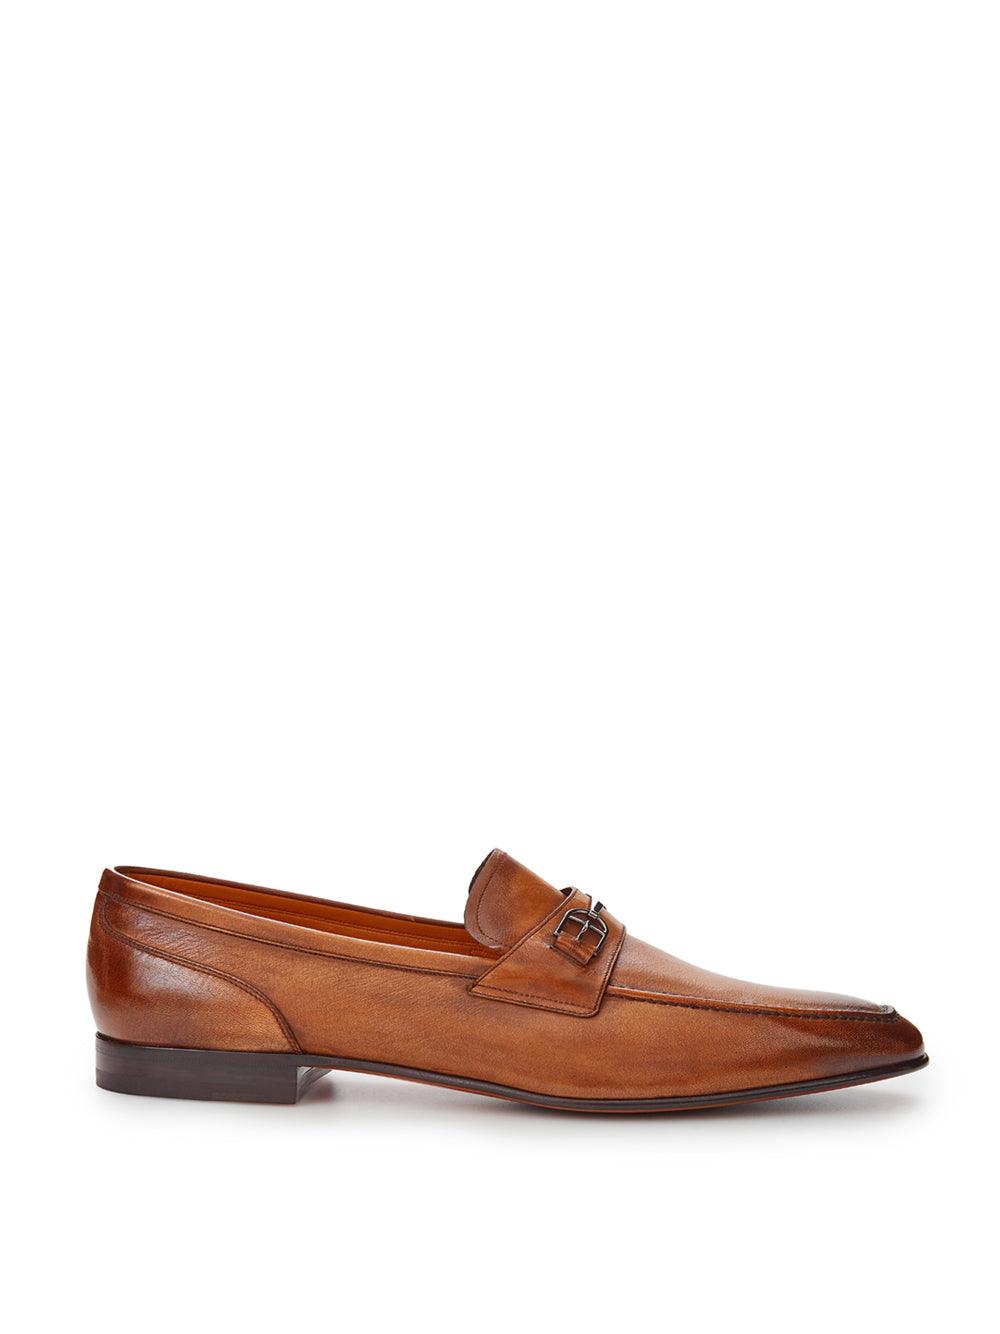 Bally Tobacco Leather Brian Loafer - Ellie Belle